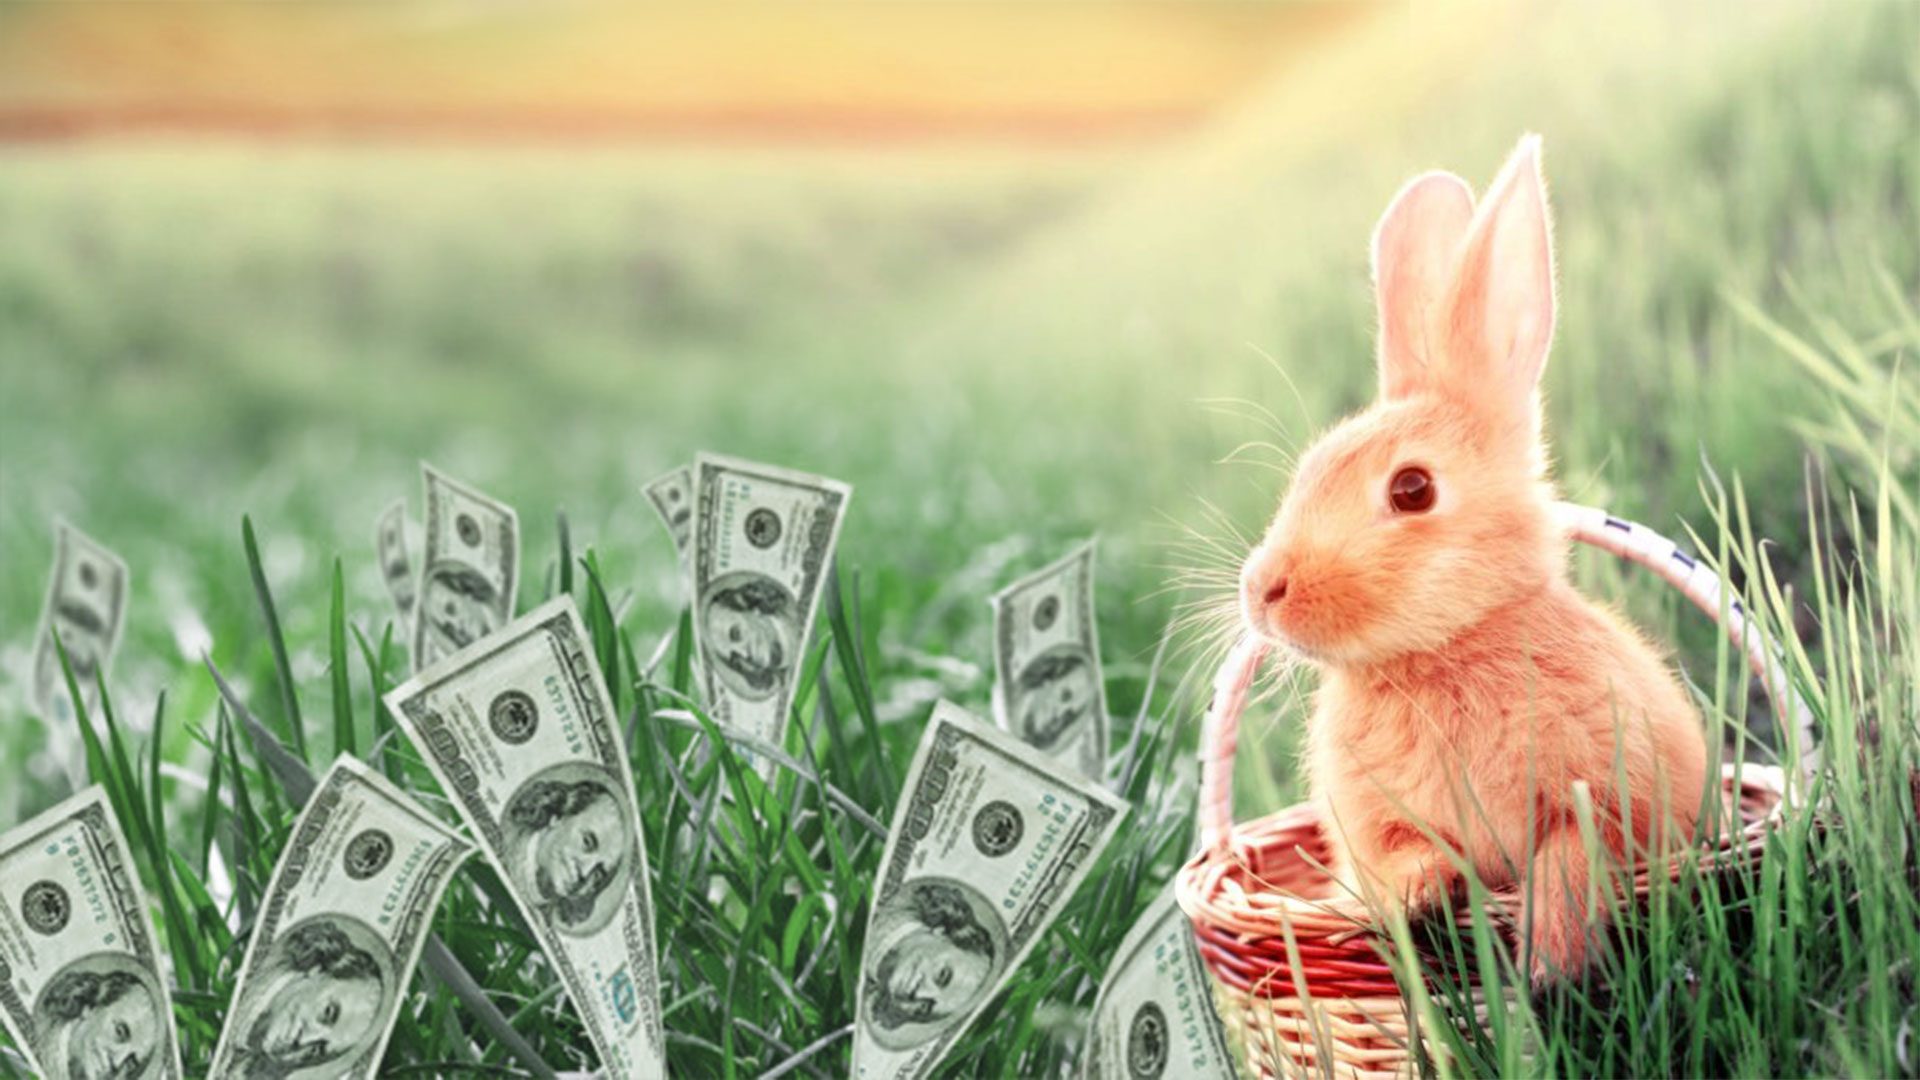 The Easter Bunny Just Brought $20 Pay Rates! | Culinary Staffing Service